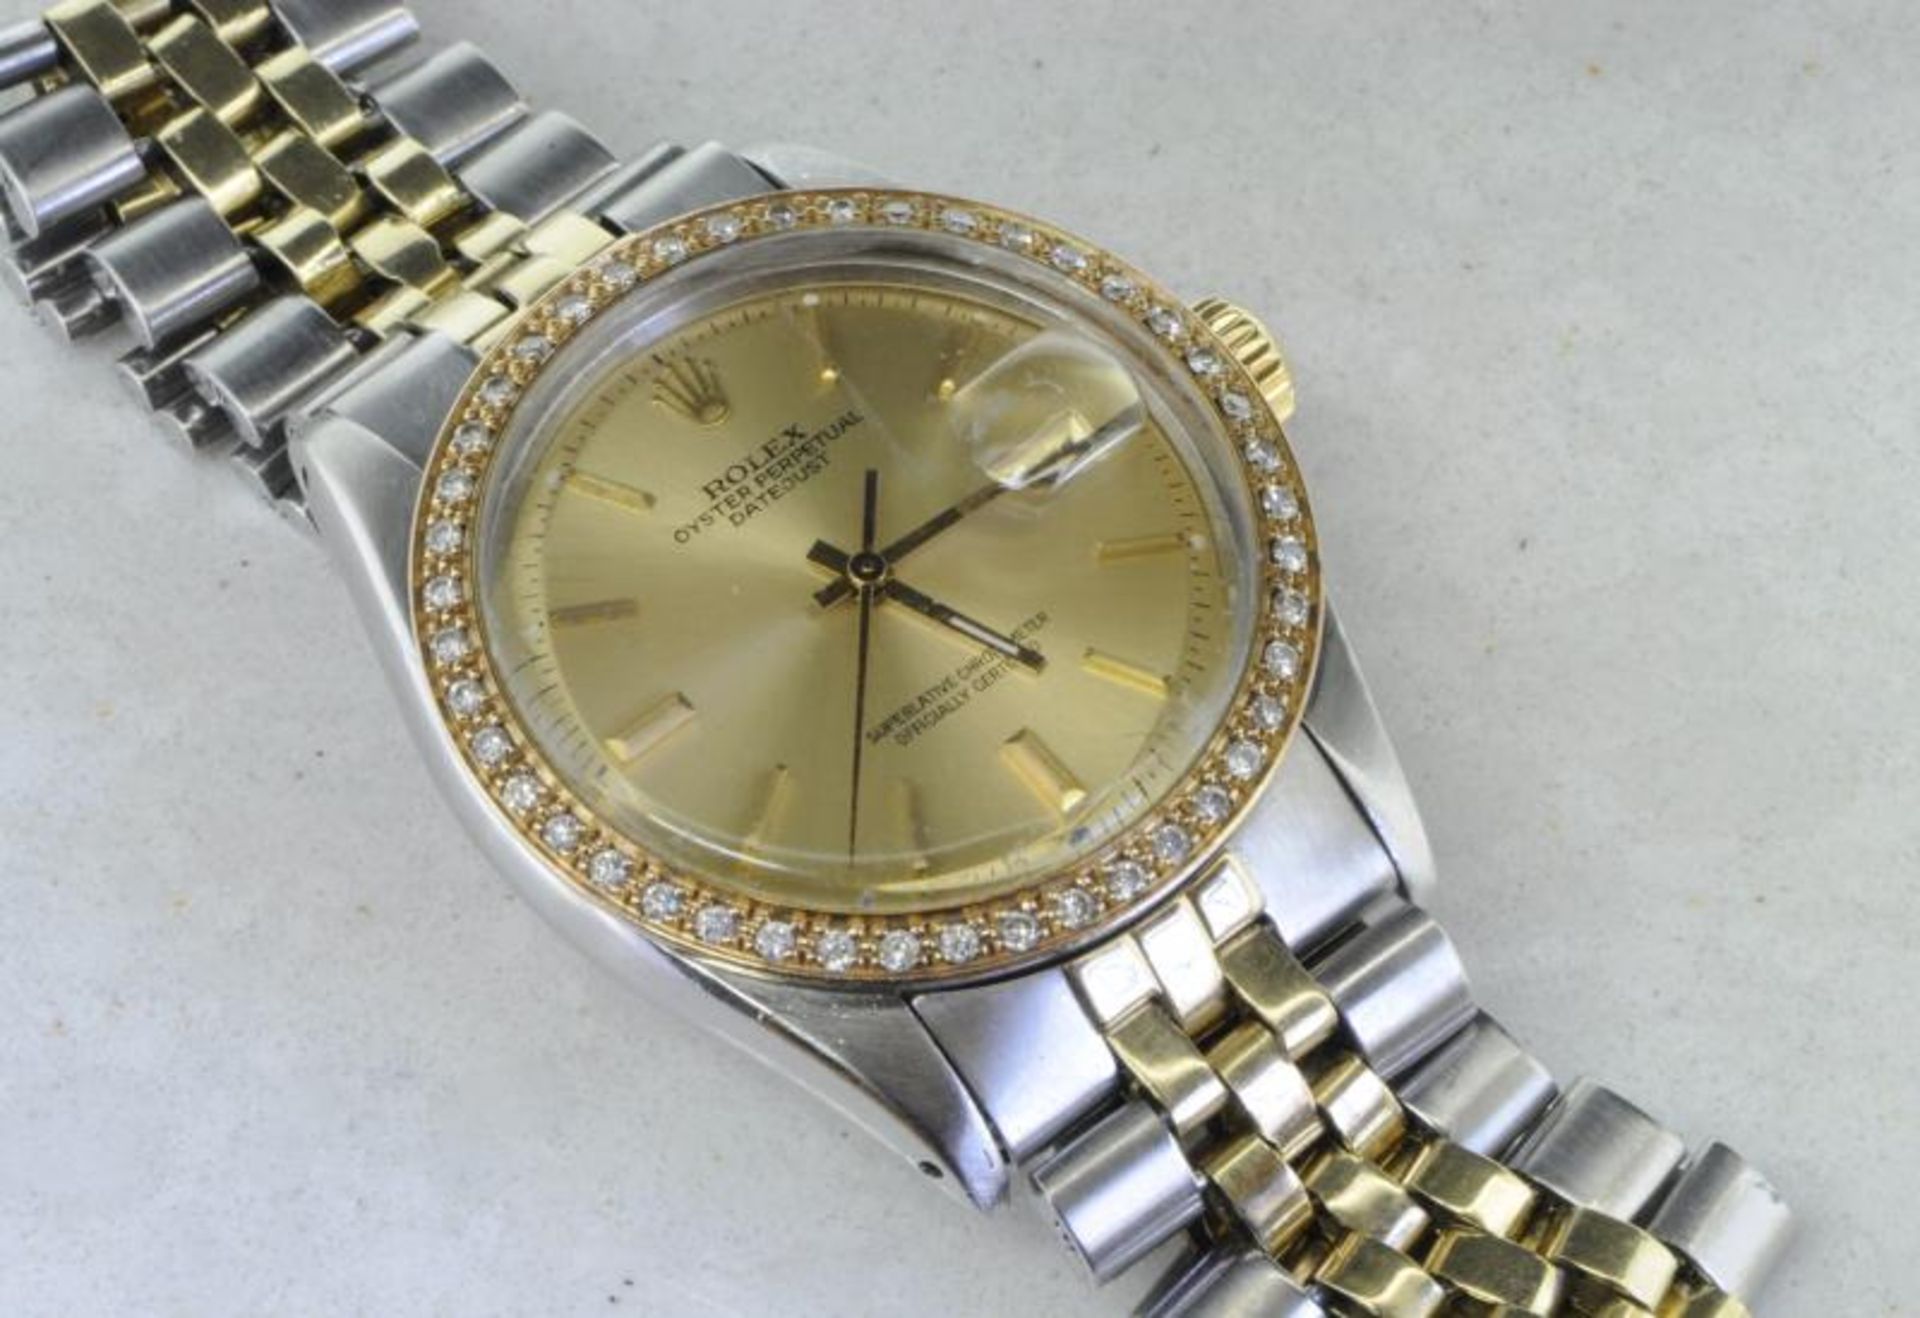 Gentlemen's Rolex Oyster Perpetual Date, silvered dial with baton hour markers, after market diamond